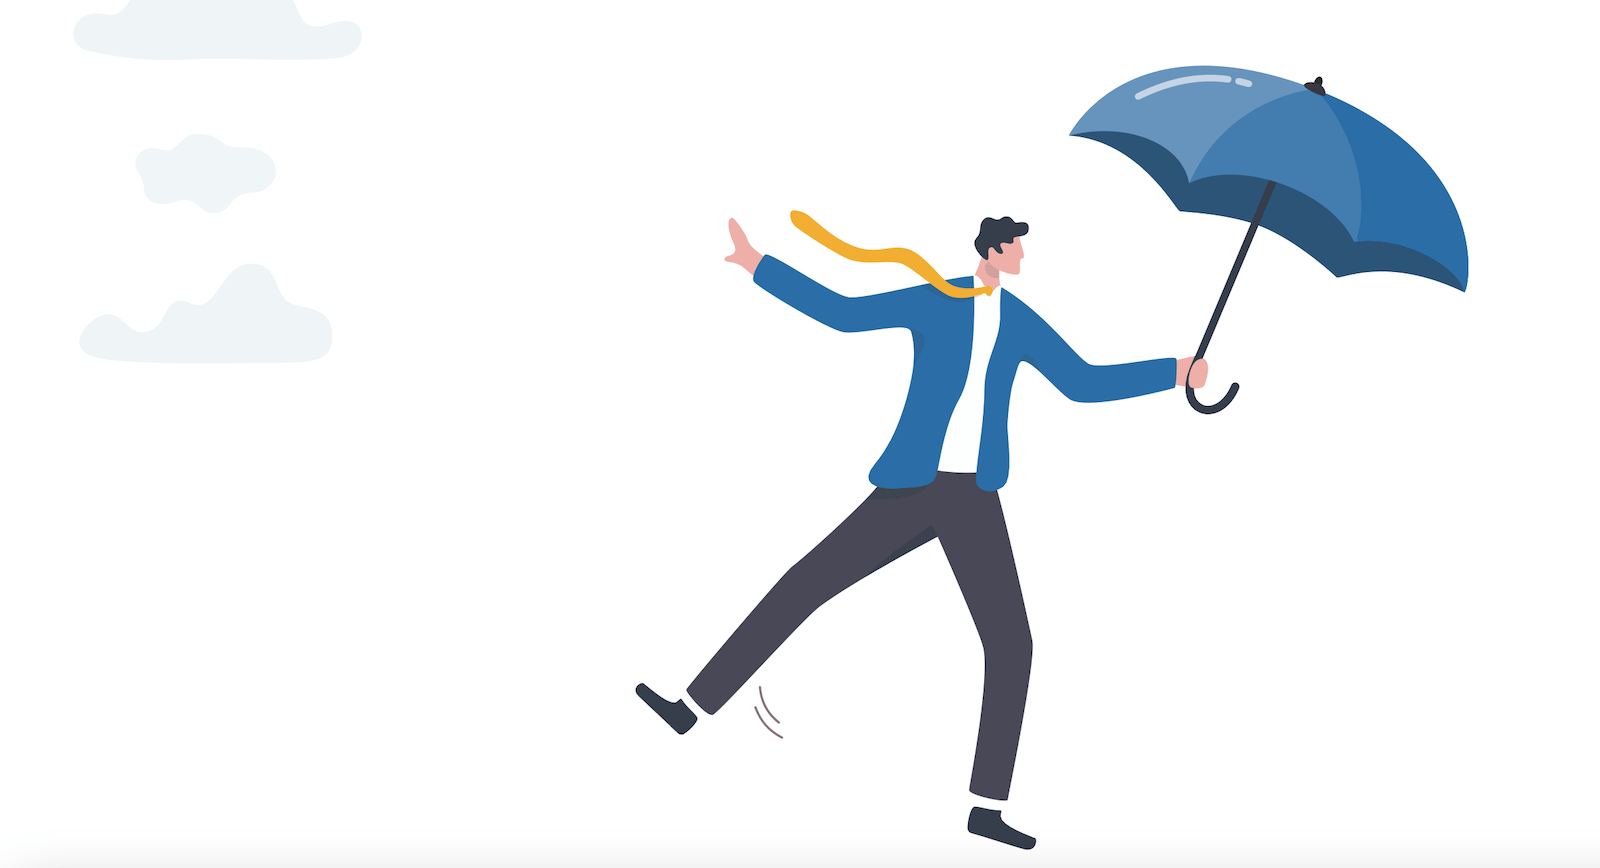 Man floating with umbrella shows agility in avoiding business chaos